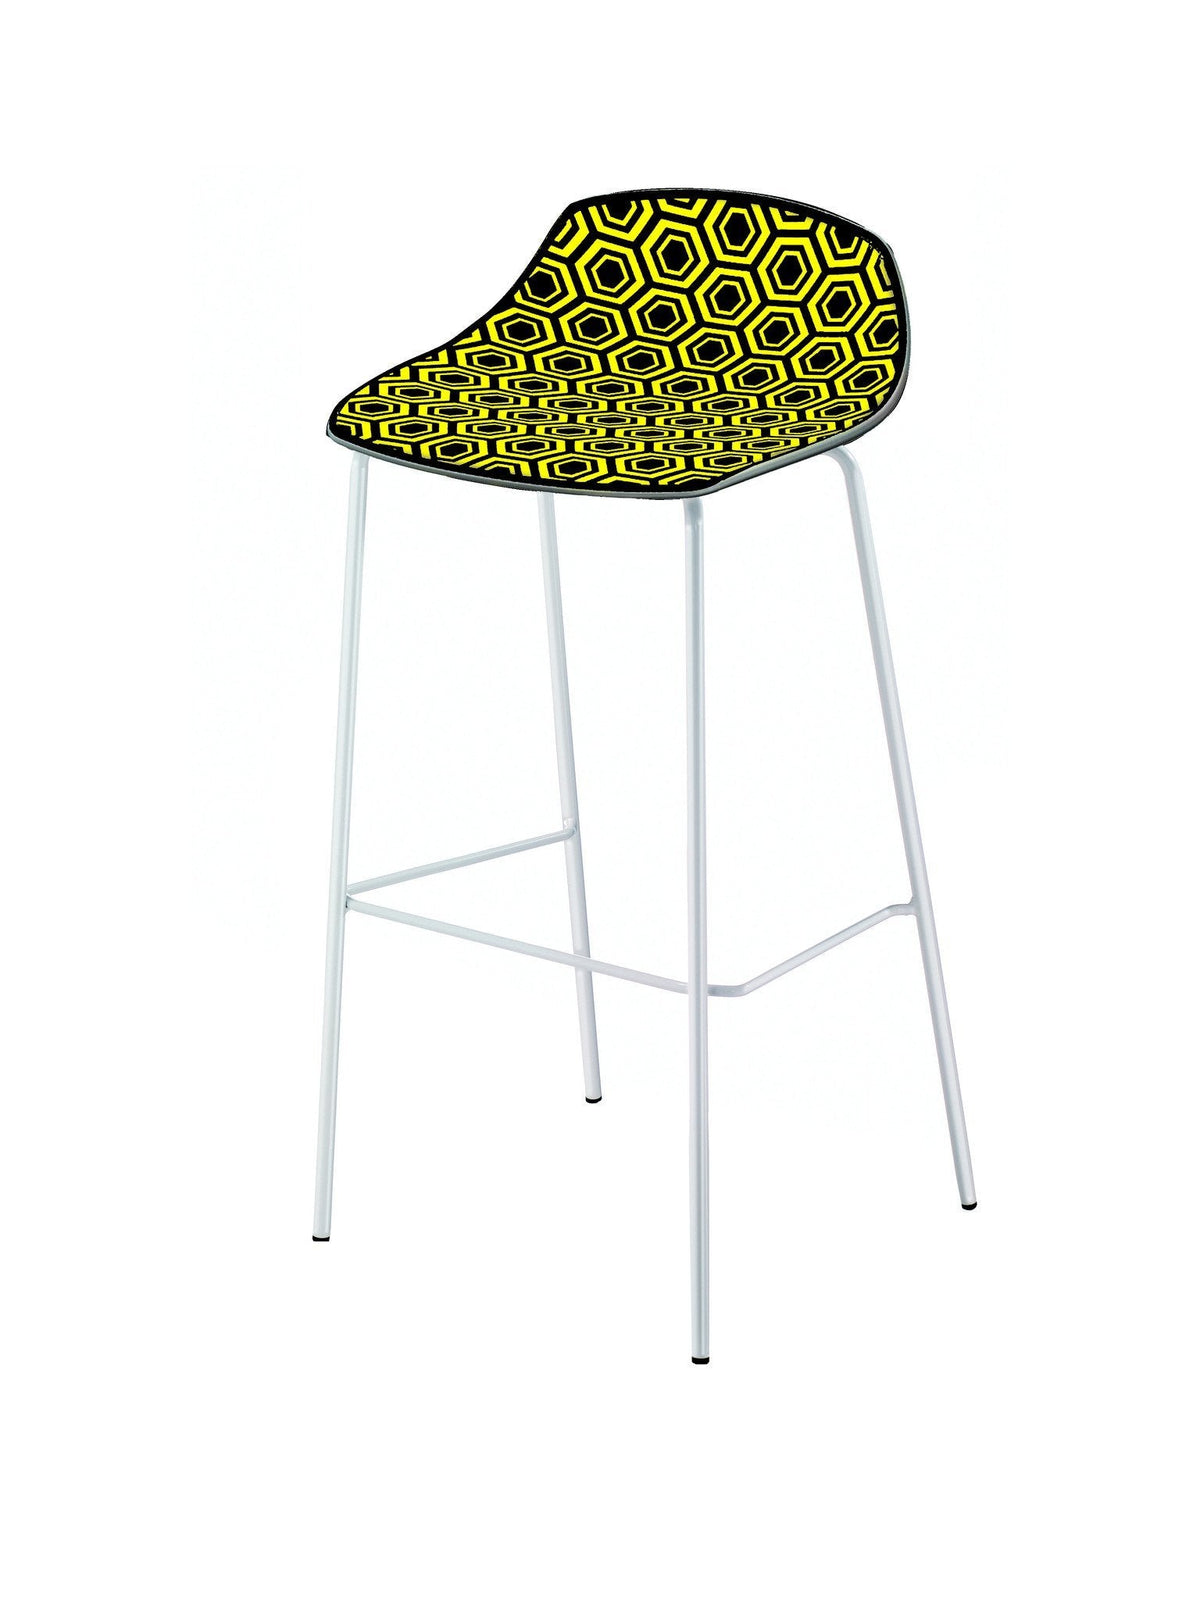 Alhambra High Stool c/w Metal Legs-Gaber-Contract Furniture Store